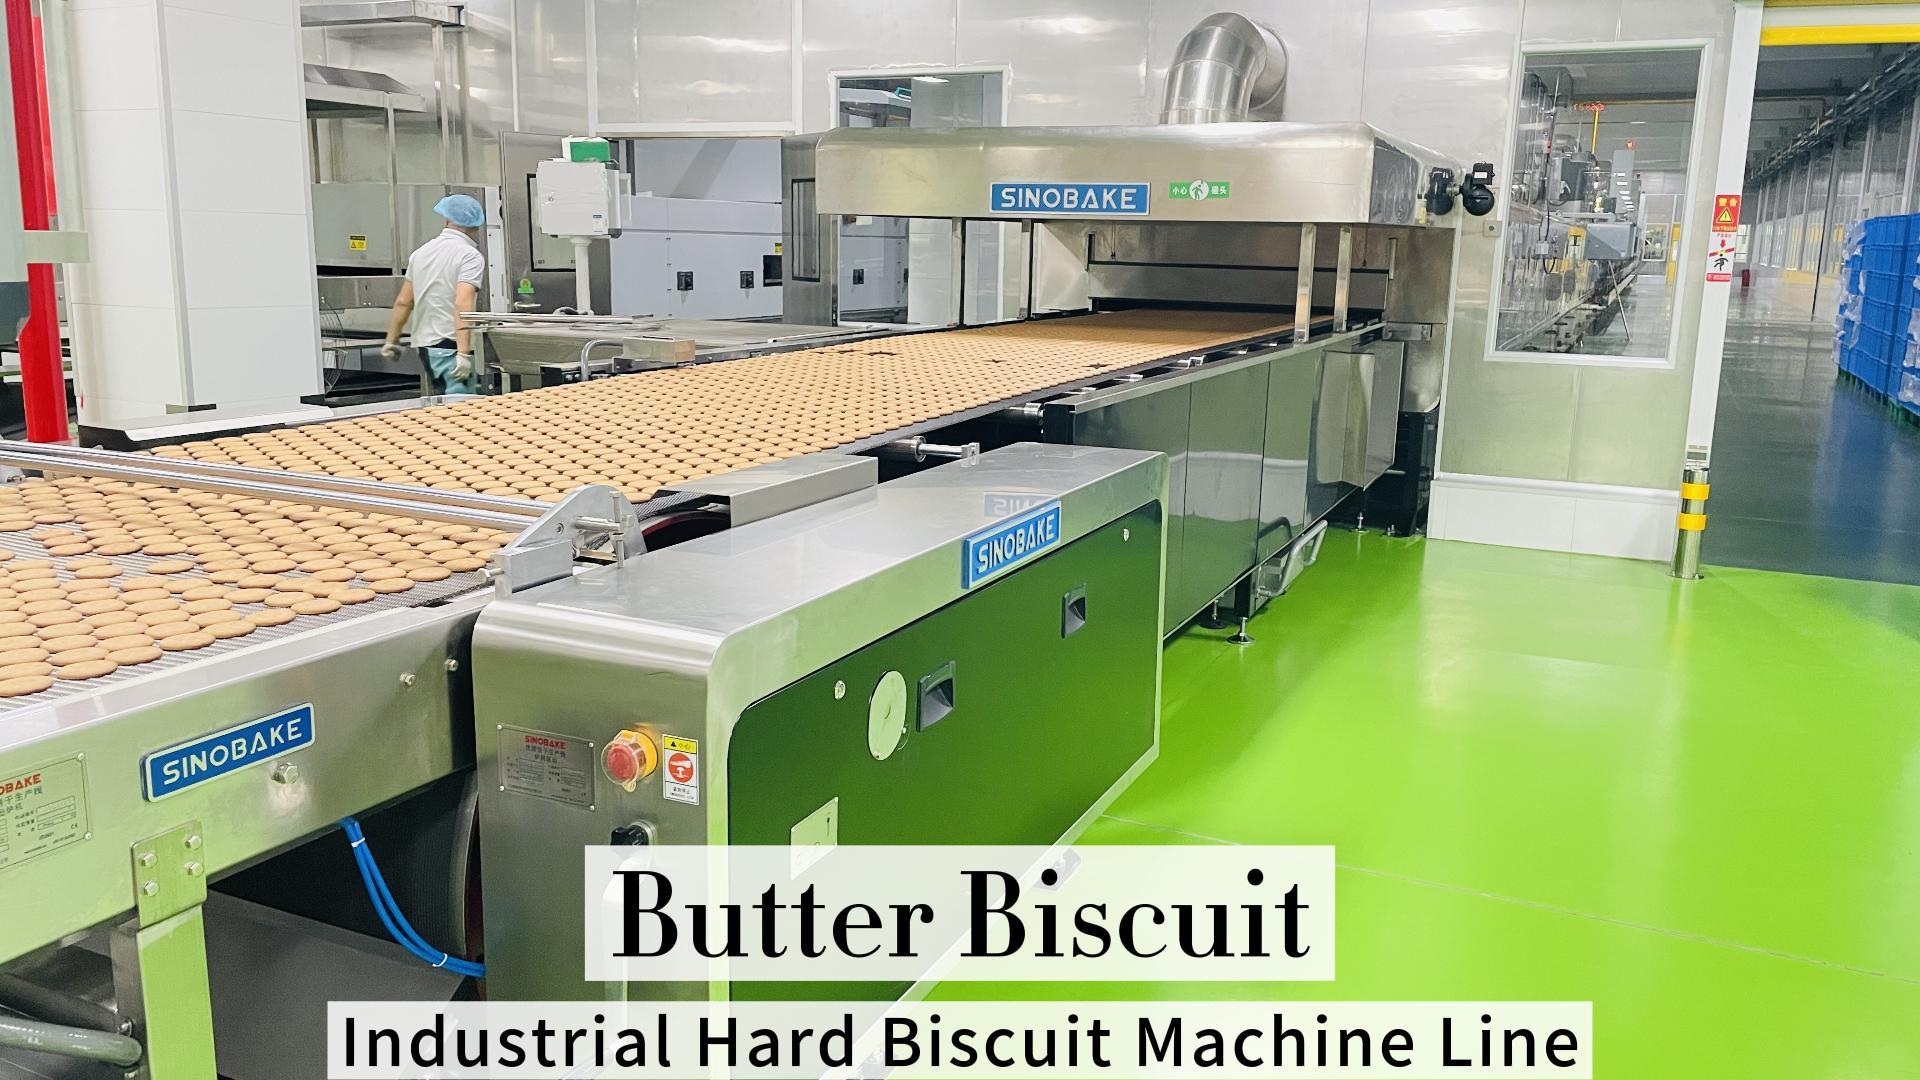 Building a Butter Biscuit Machine/ Hard Biscuit Production Line